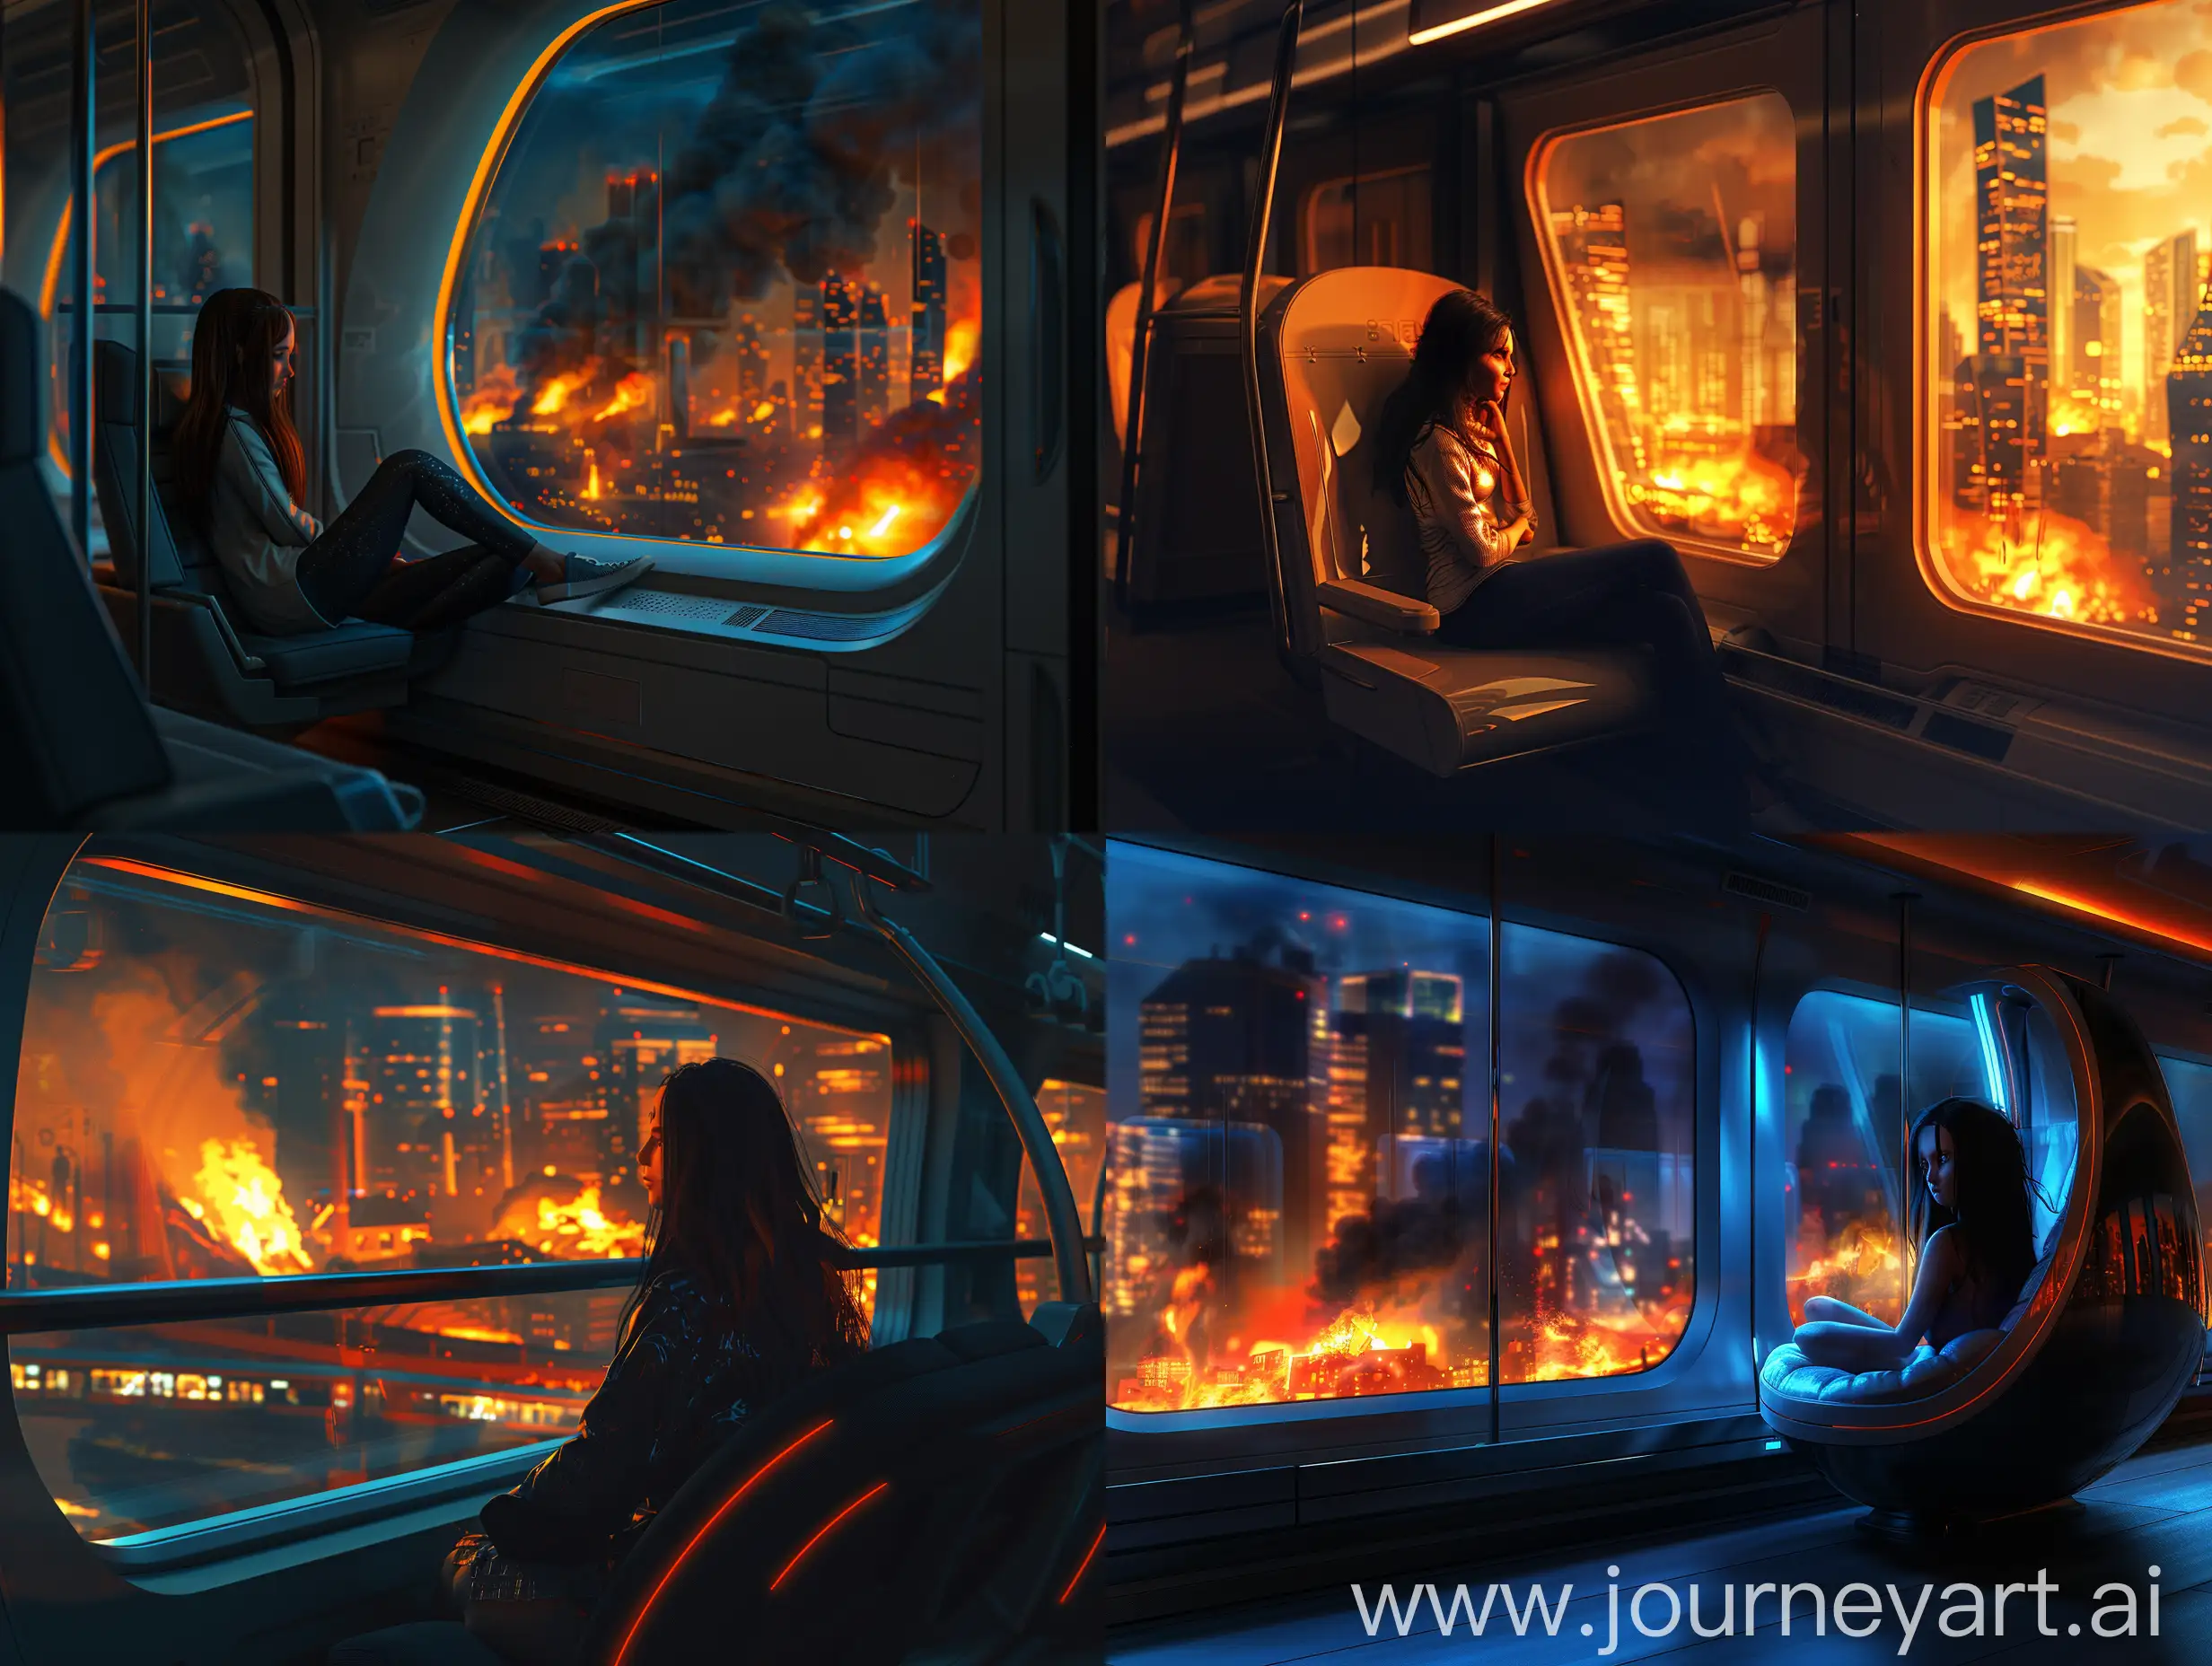 Lonely-Girl-Contemplates-Burning-City-from-Fast-Moving-Train-at-Night